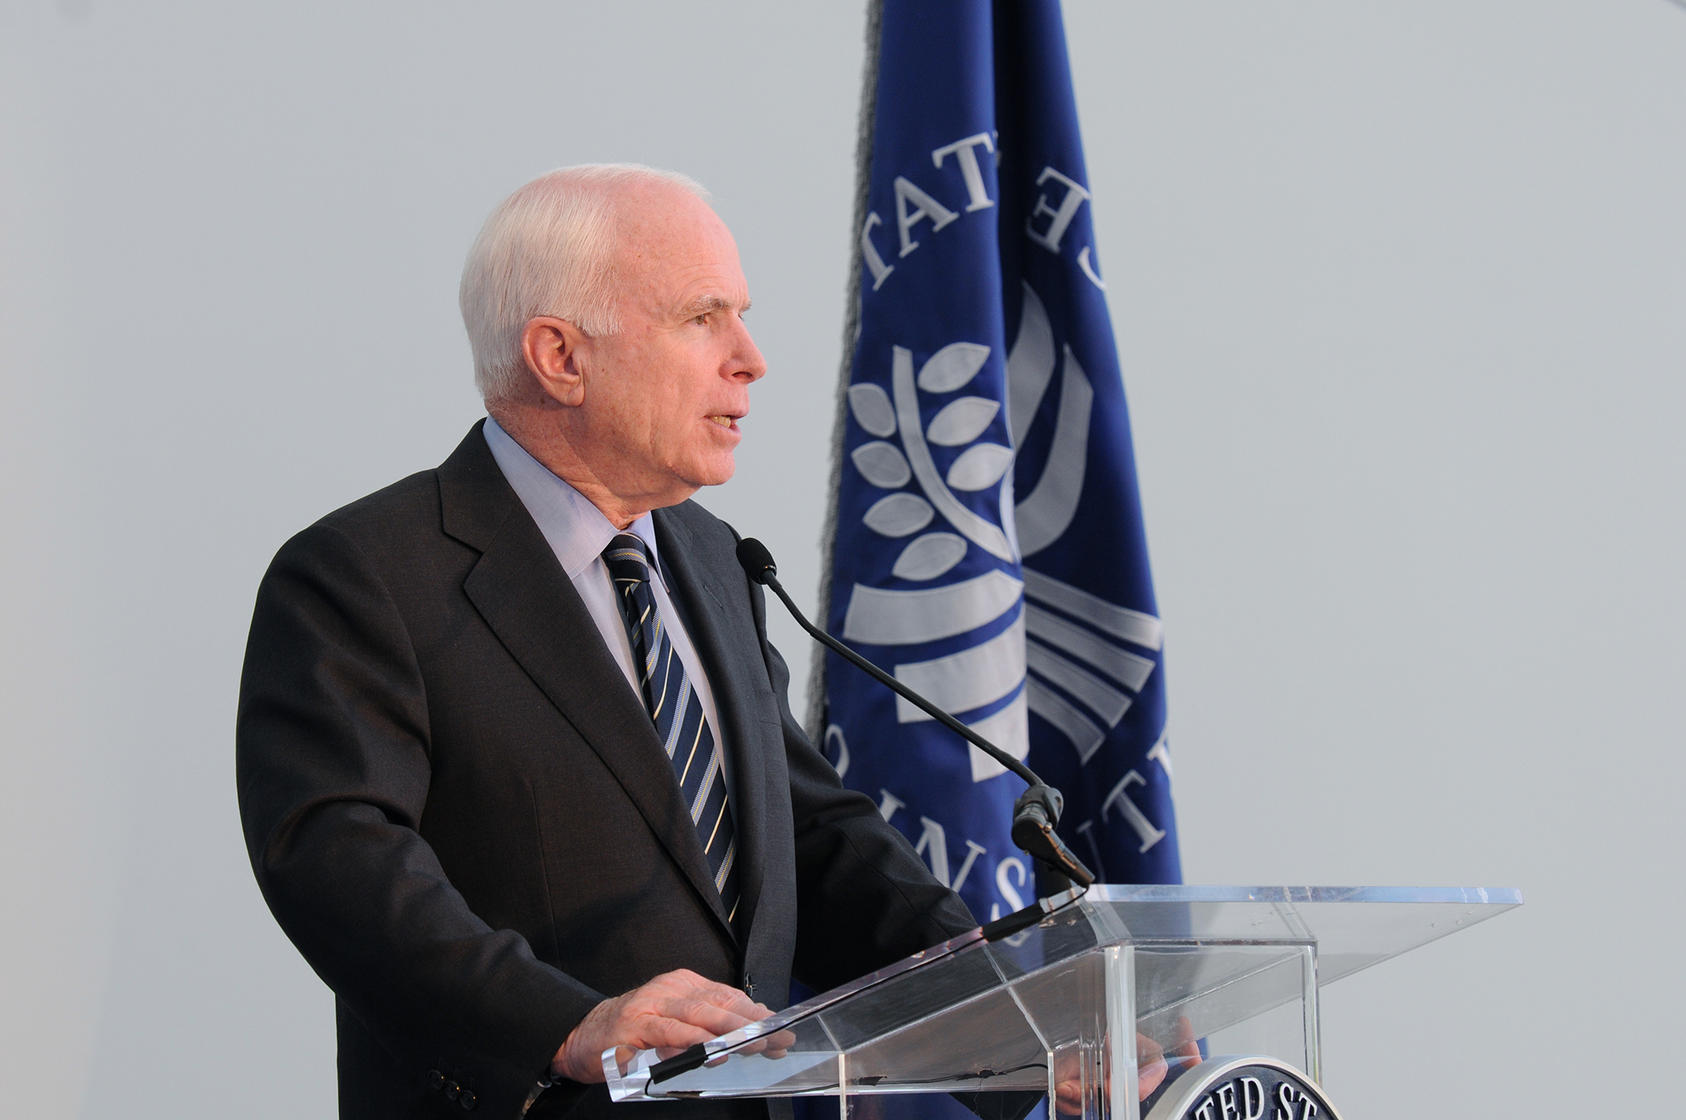 Senator John McCain delivered the 2011 Dean Acheson Lecture at the U.S. Institute of Peace, May 19, 2011.